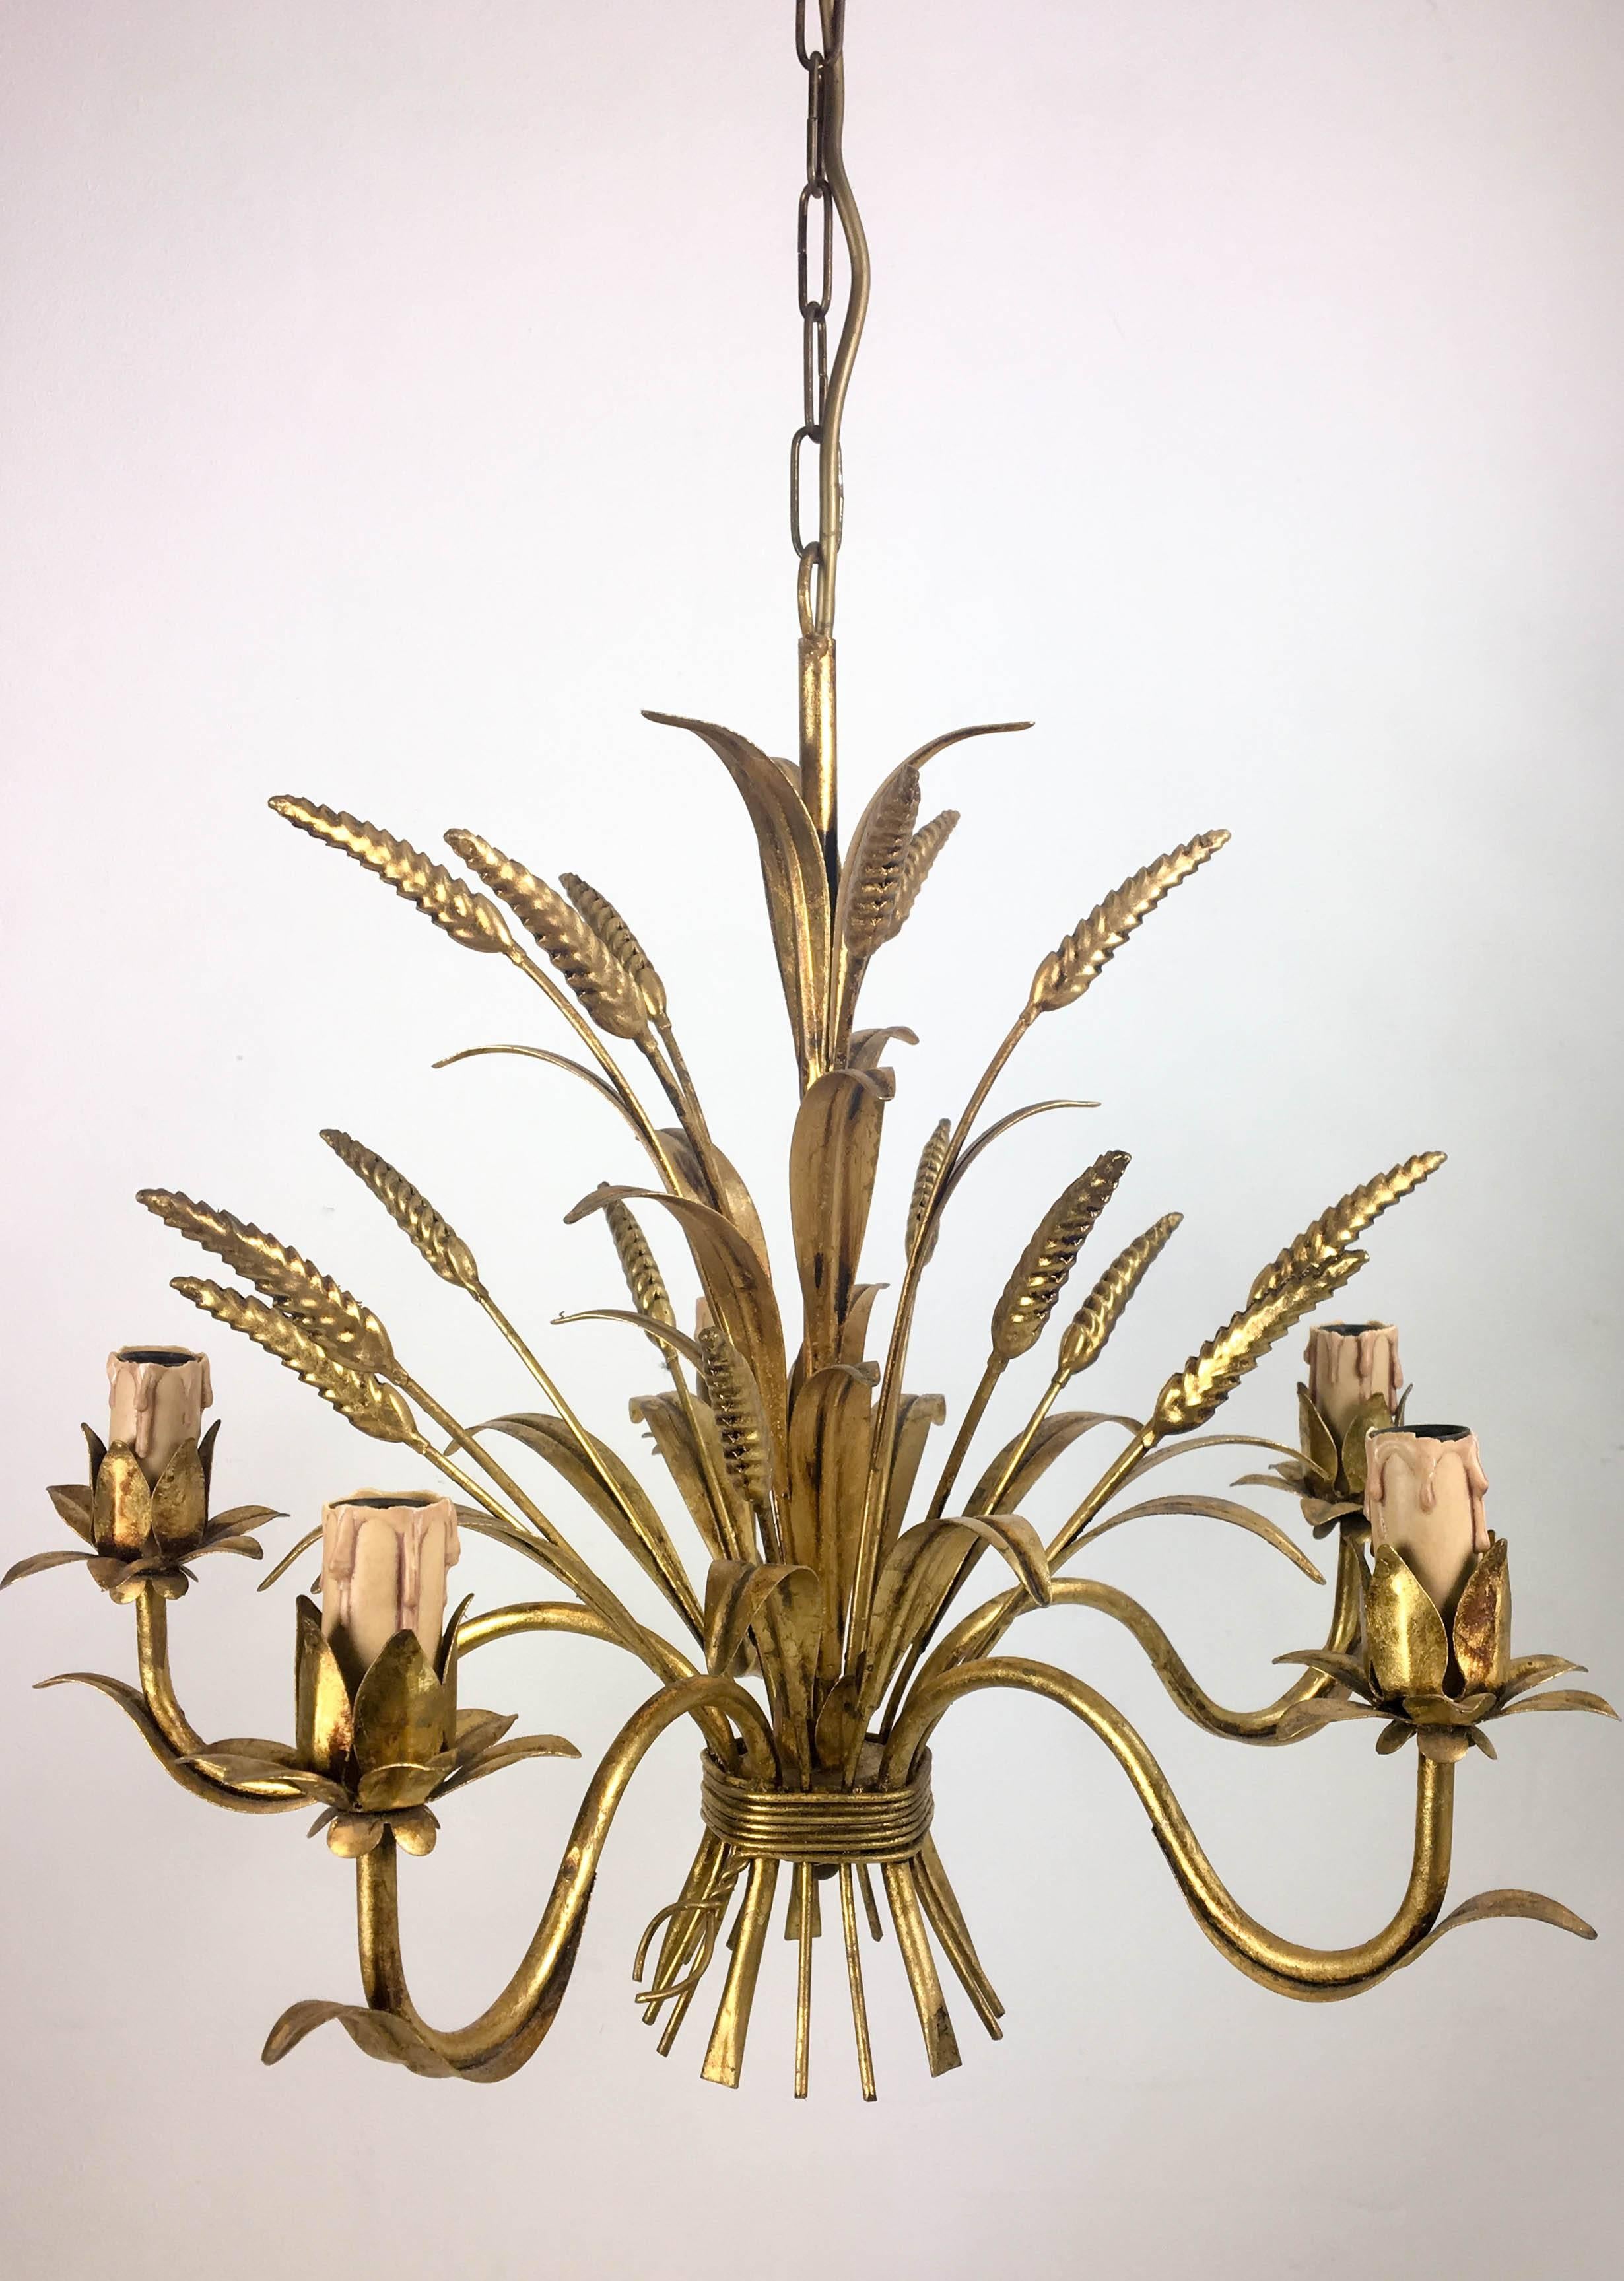 Elegant Italian gilded metal pendant light in the iconic wheat sheaf design. This 1970s example features five armatures and is in good condition.